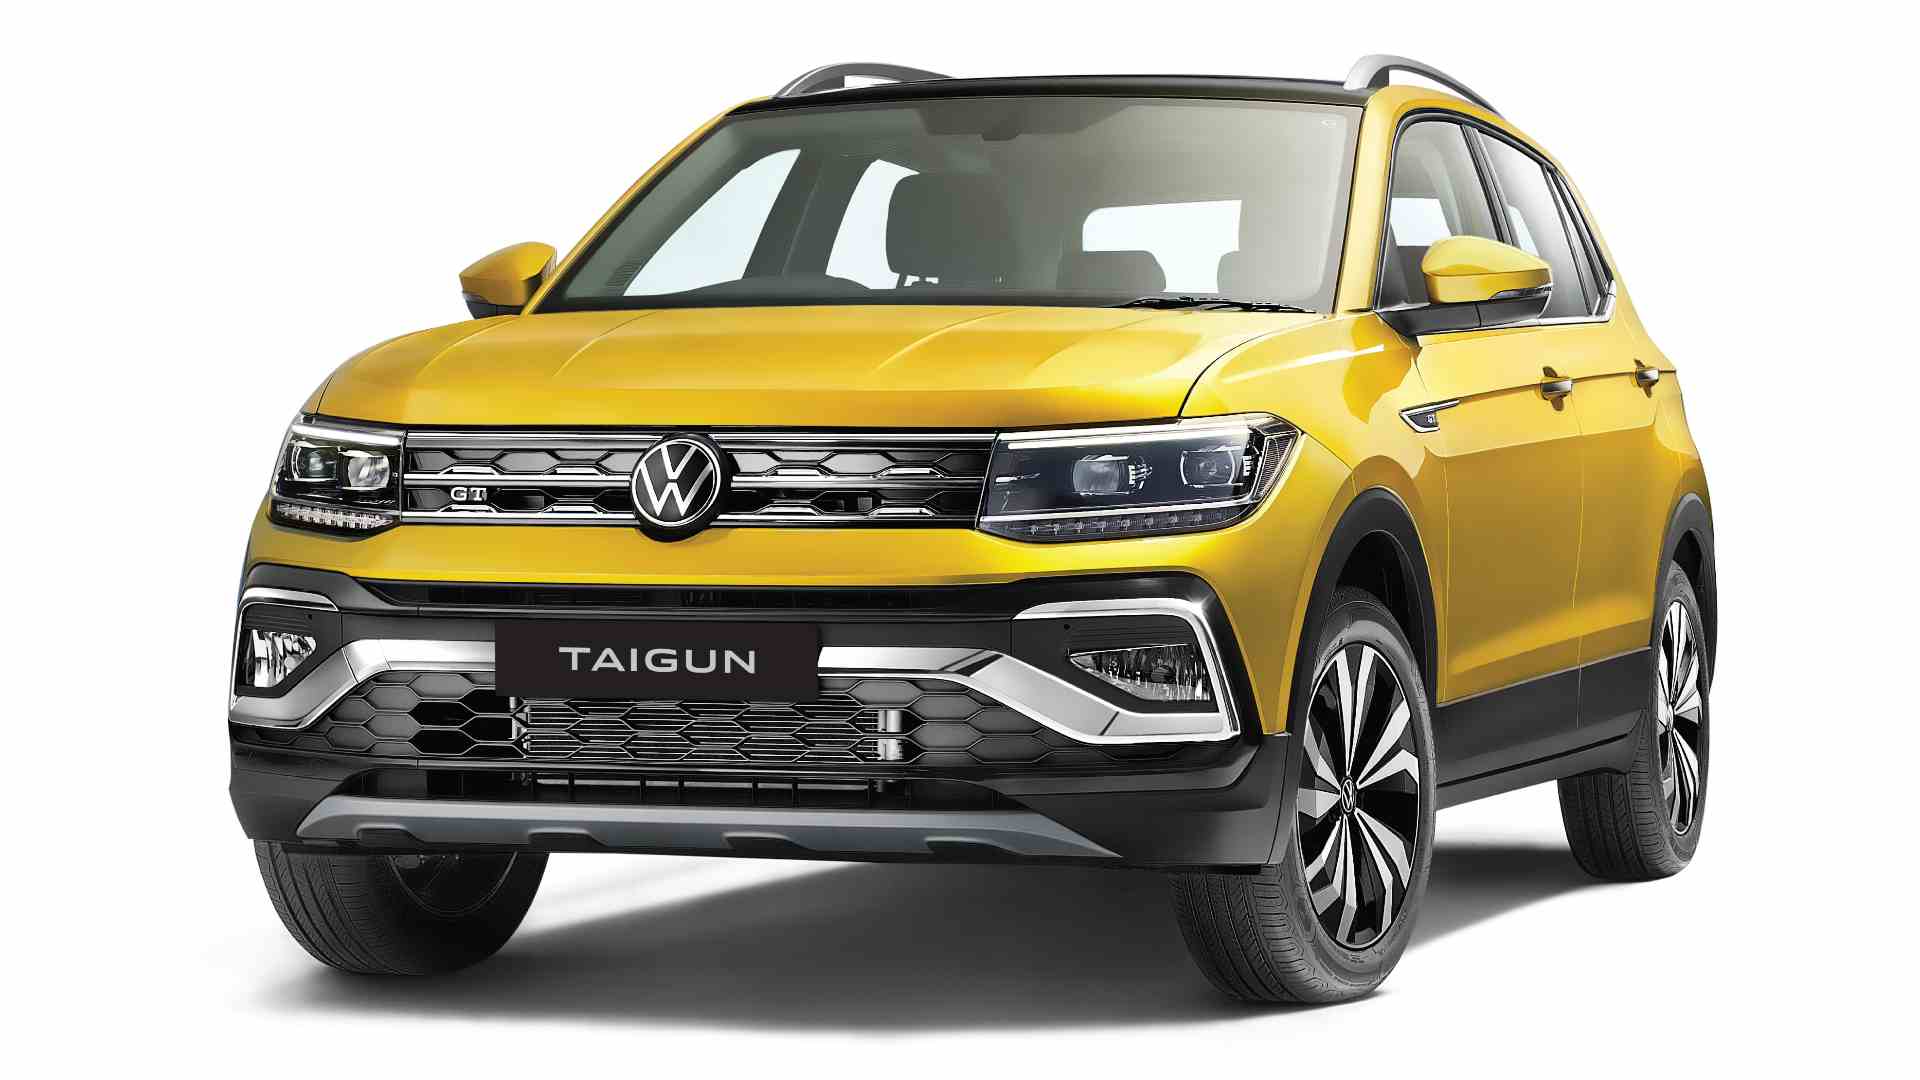 You are currently viewing Volkswagen Taigun SUV revealed in production form ahead of festive season launch- Technology News, FP